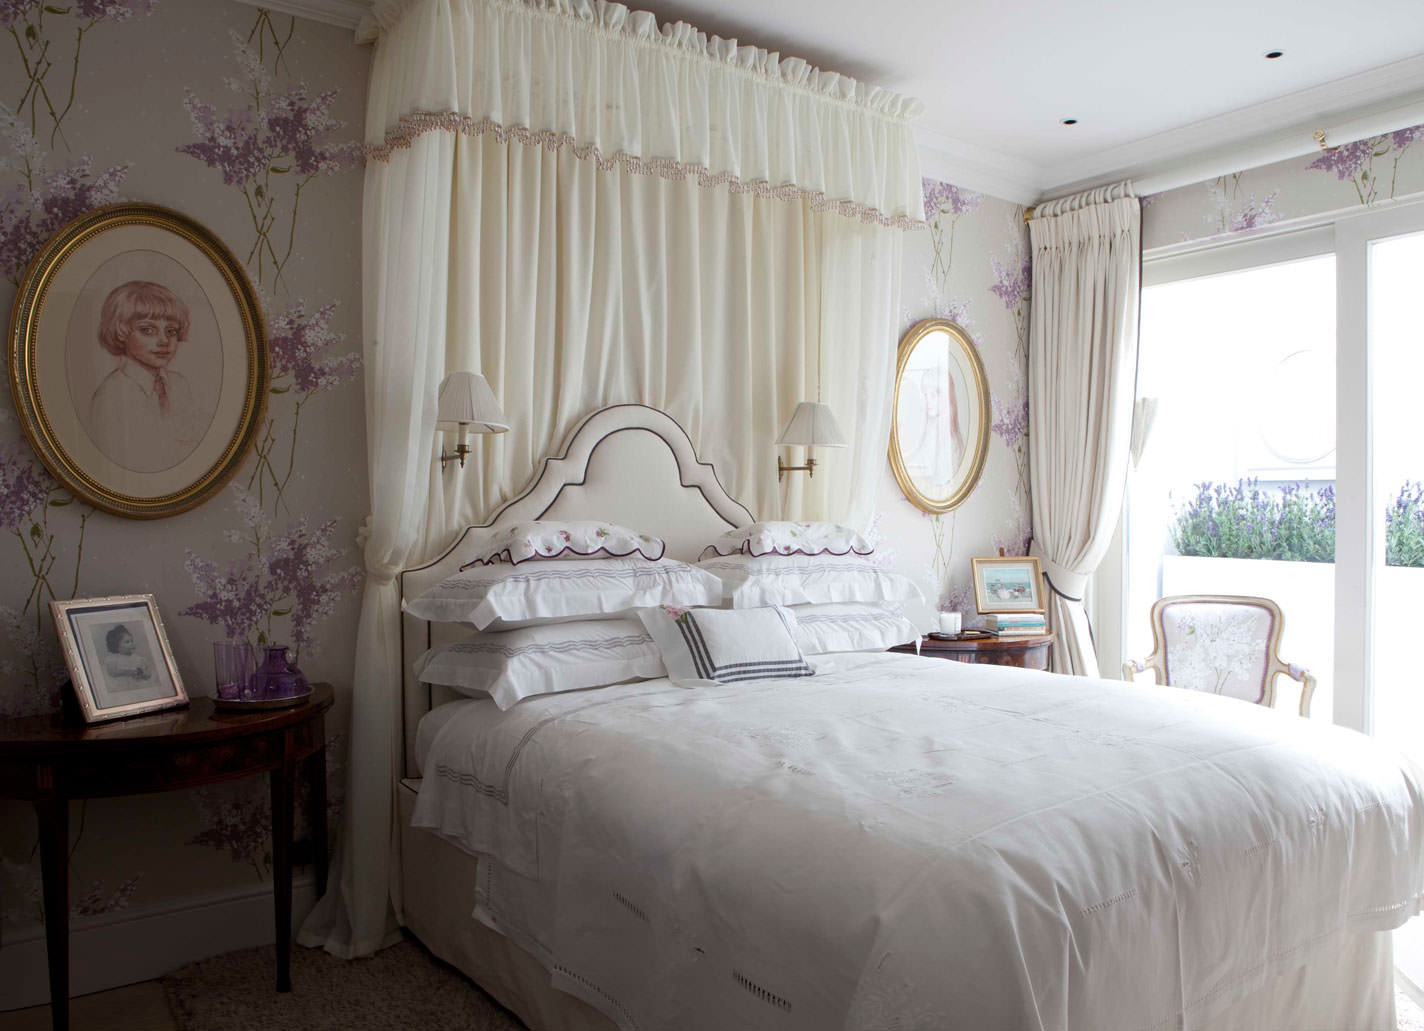 White canopy in the bedroom with portraits on the wall